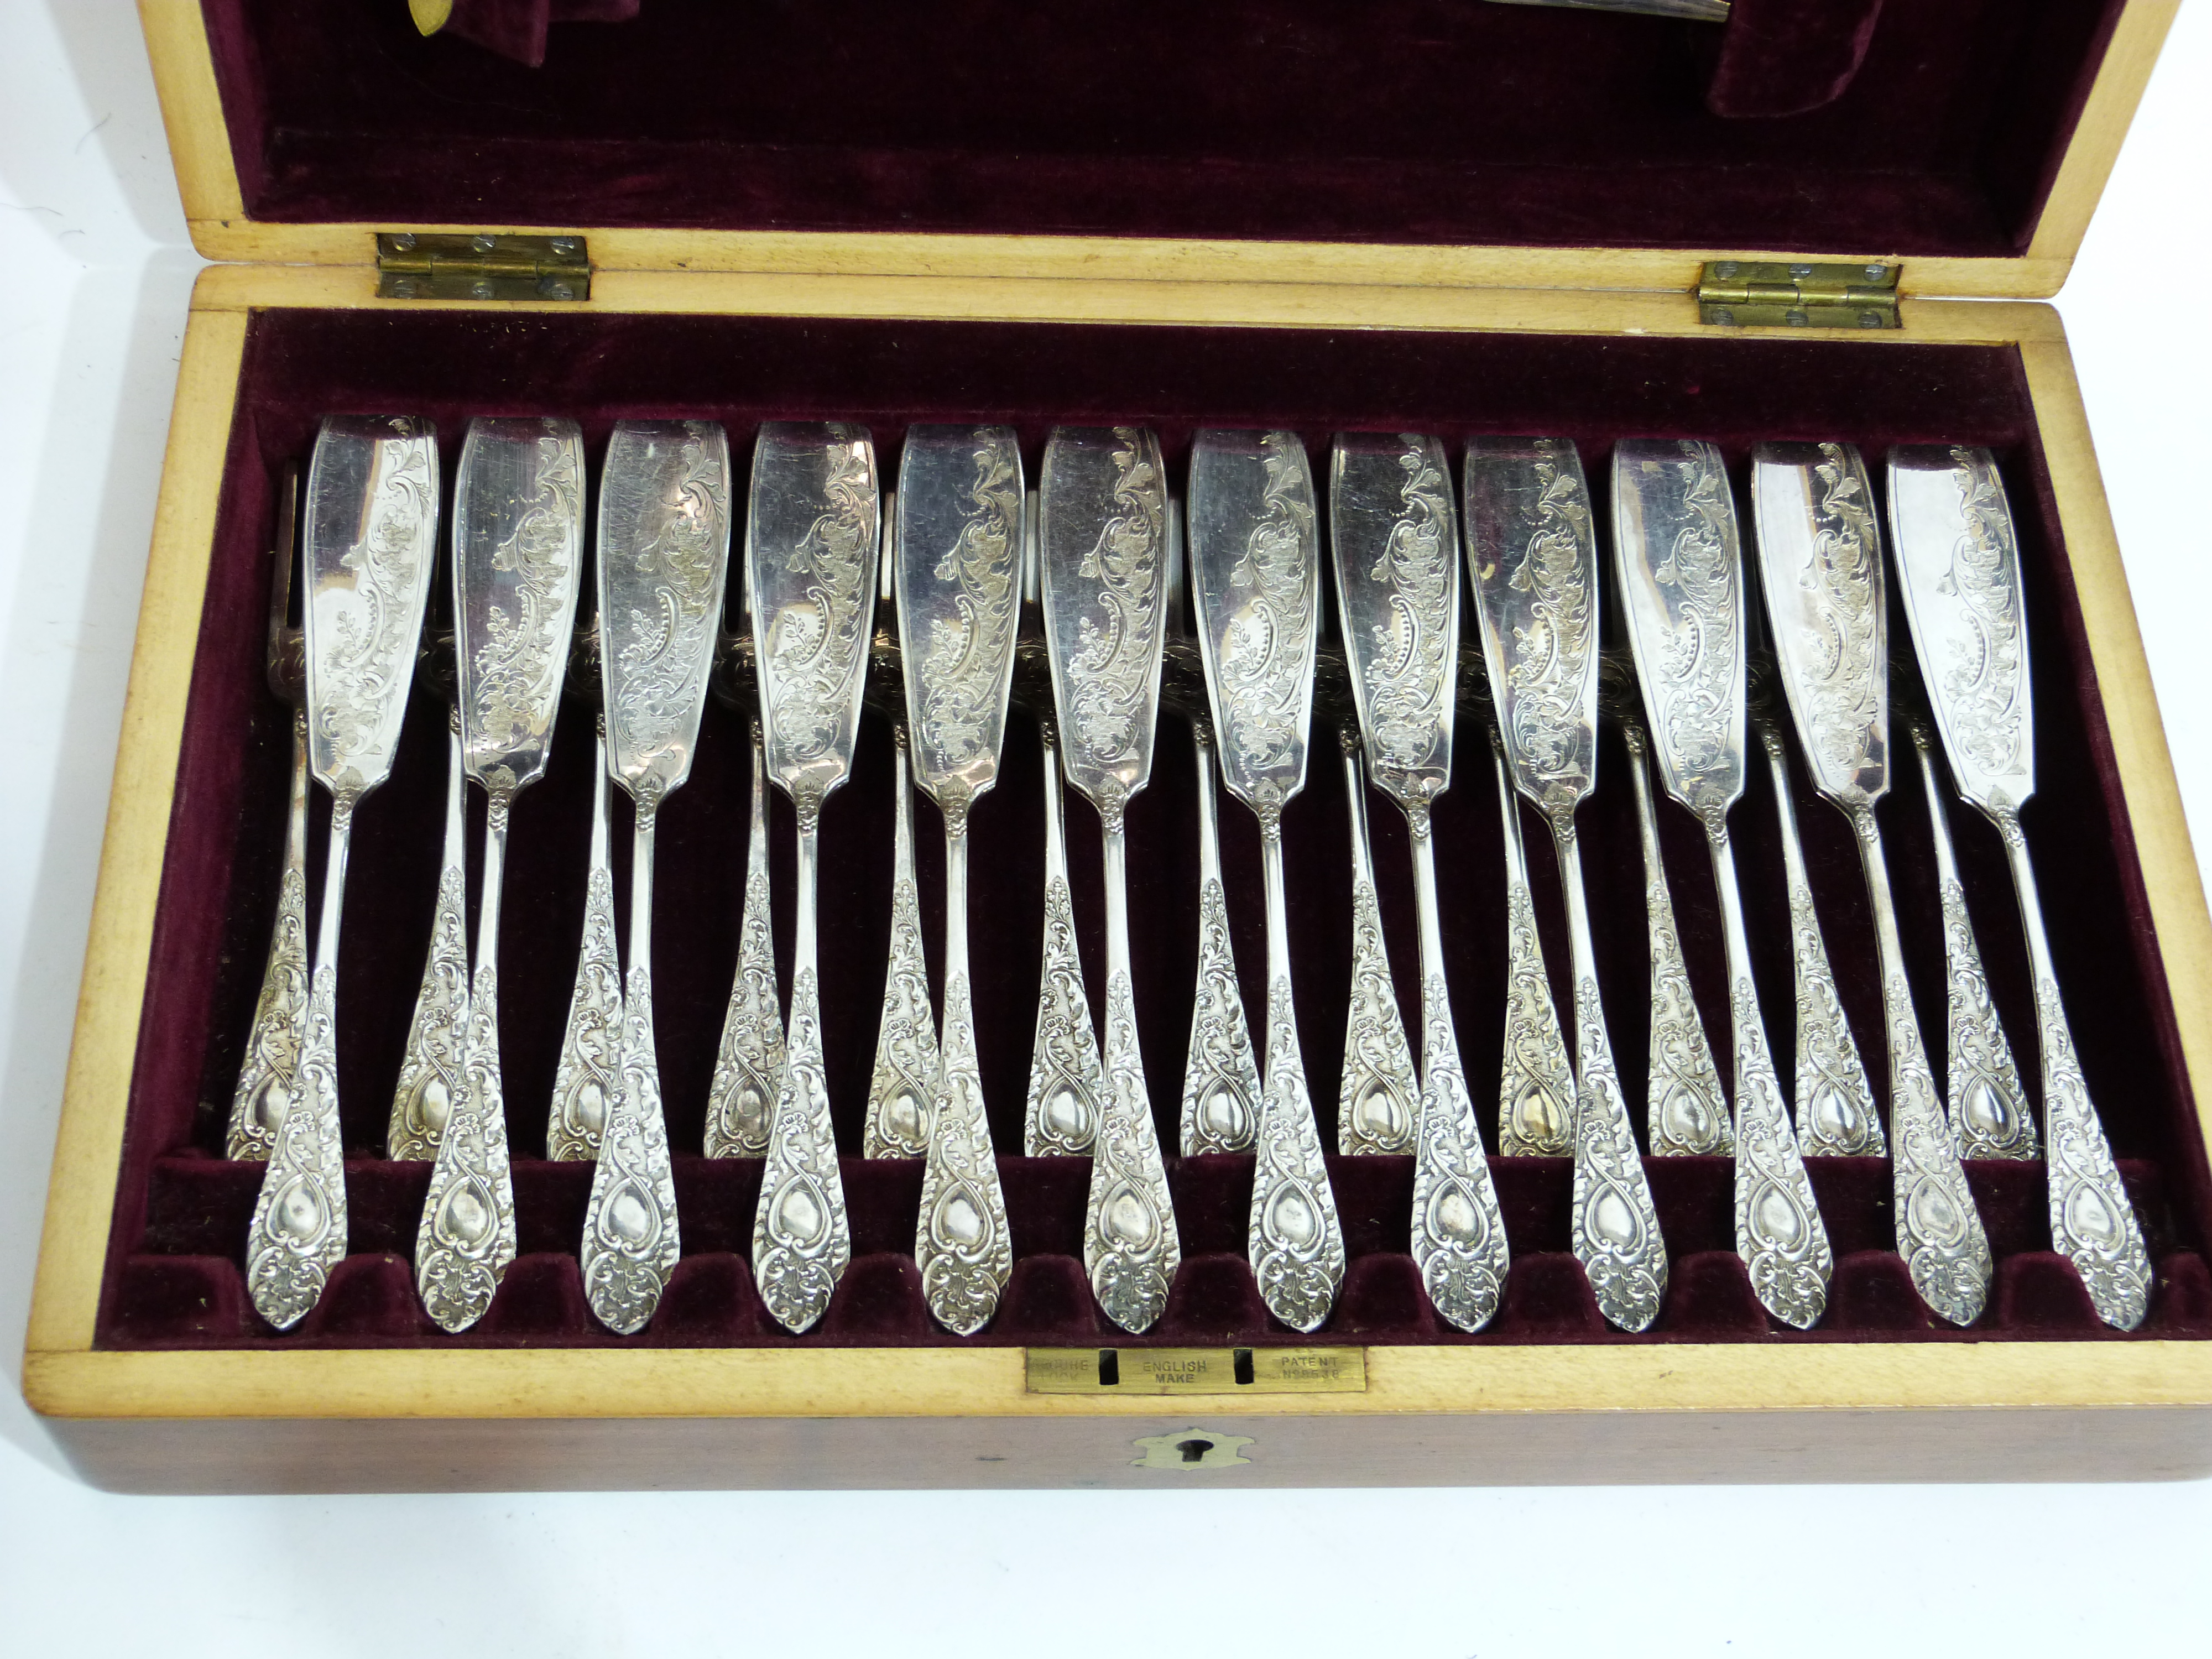 Mahogany cased set of 12 silver plated Fish Eaters and matching Servers - Image 2 of 3